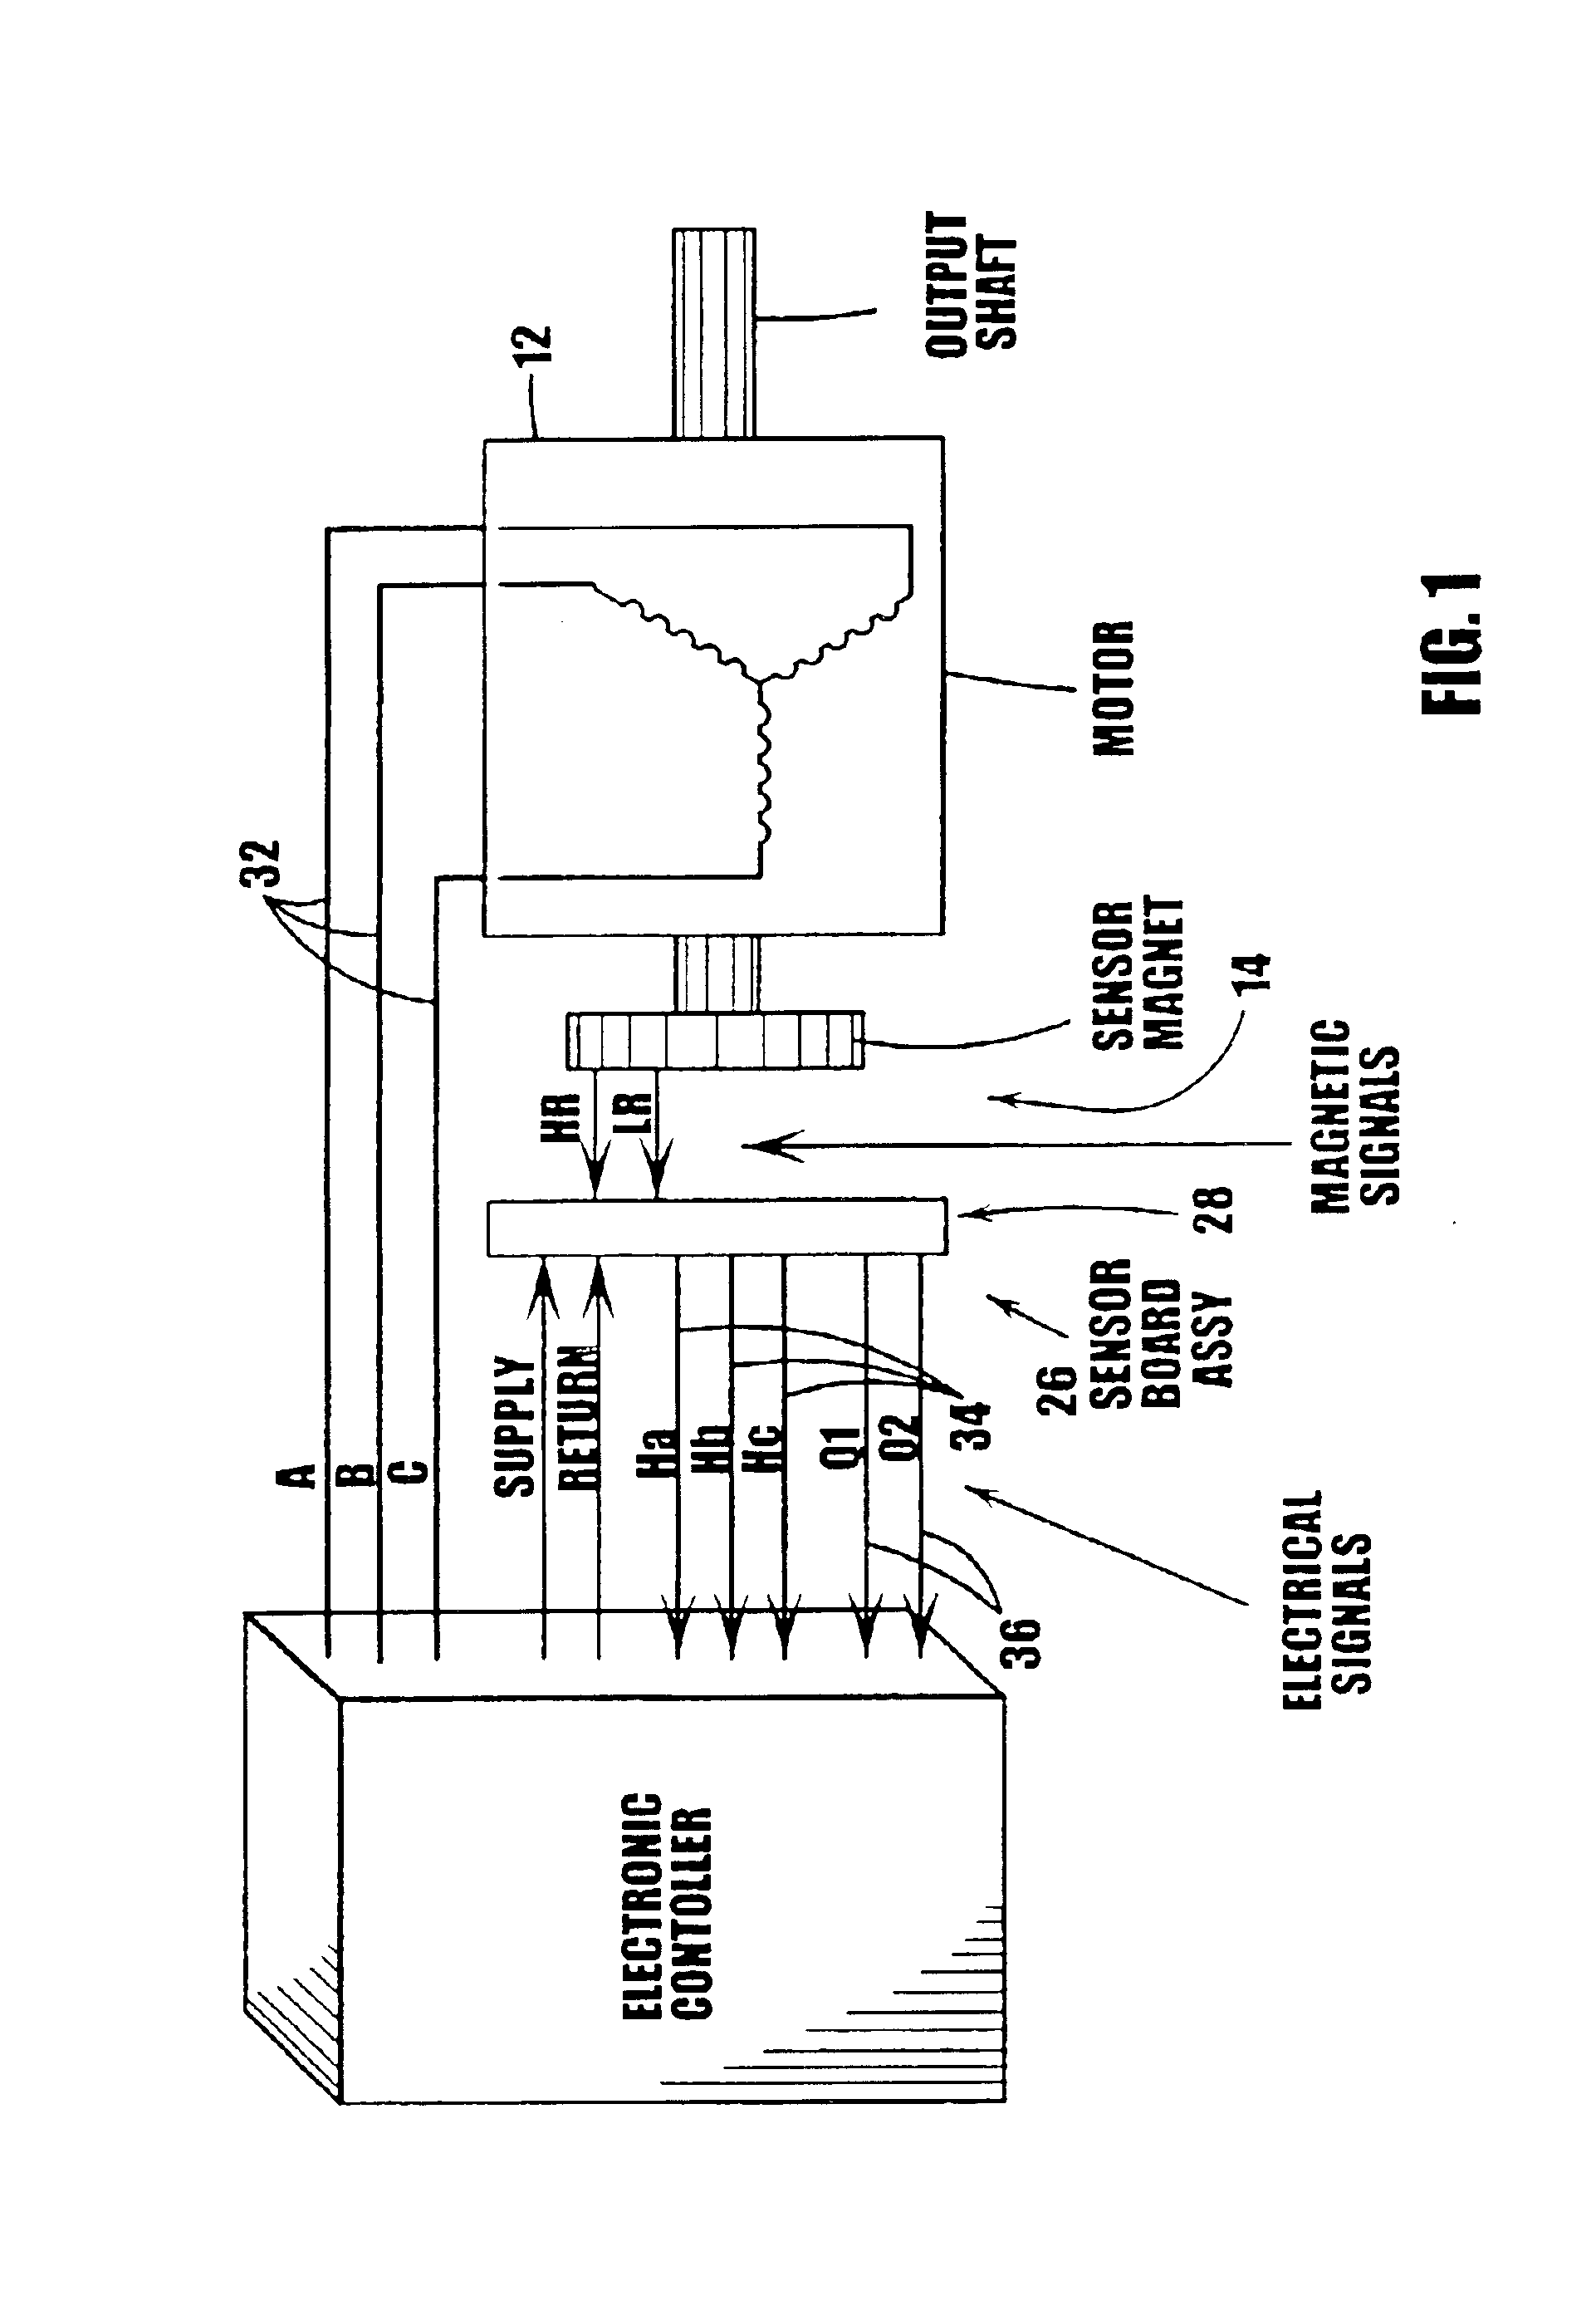 Method and apparatus for calibrating and initializing an electronically commutated motor